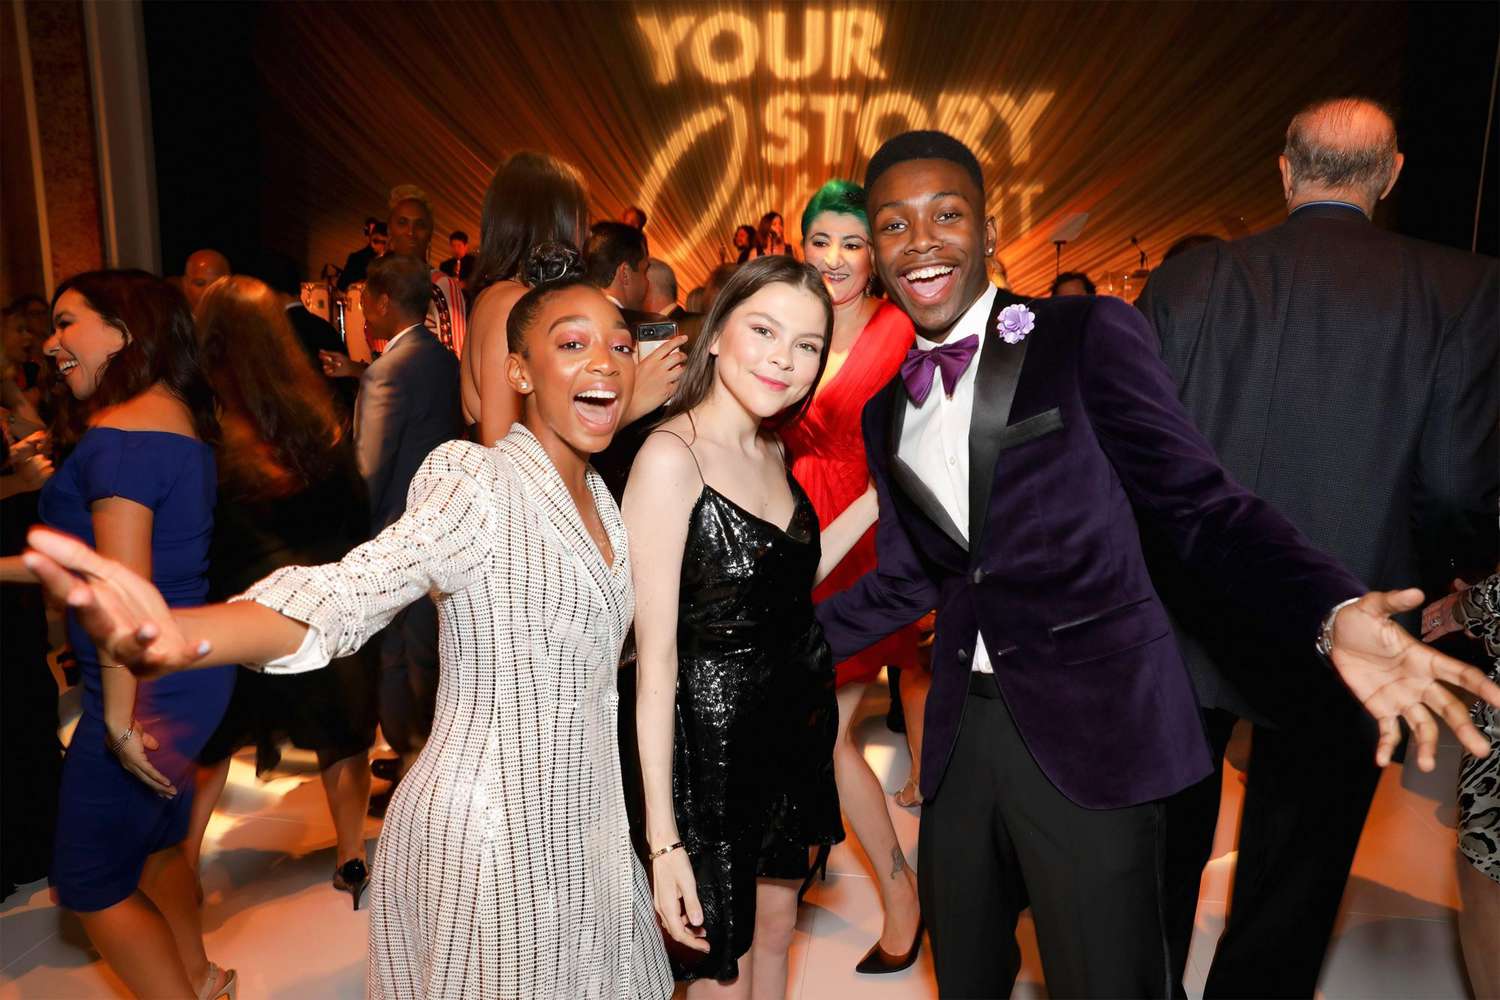 BEVERLY HILLS, CA - MAY 04: (L-R) Eris Baker, Hannah Zeile and Emcee Niles Fitch attend the Lupus LA 2019 Orange Ball at the Beverly Wilshire Hotel on May 4, 2019 in Beverly Hills, California. (Photo by Tiffany Rose/Getty Images for Lupus LA)